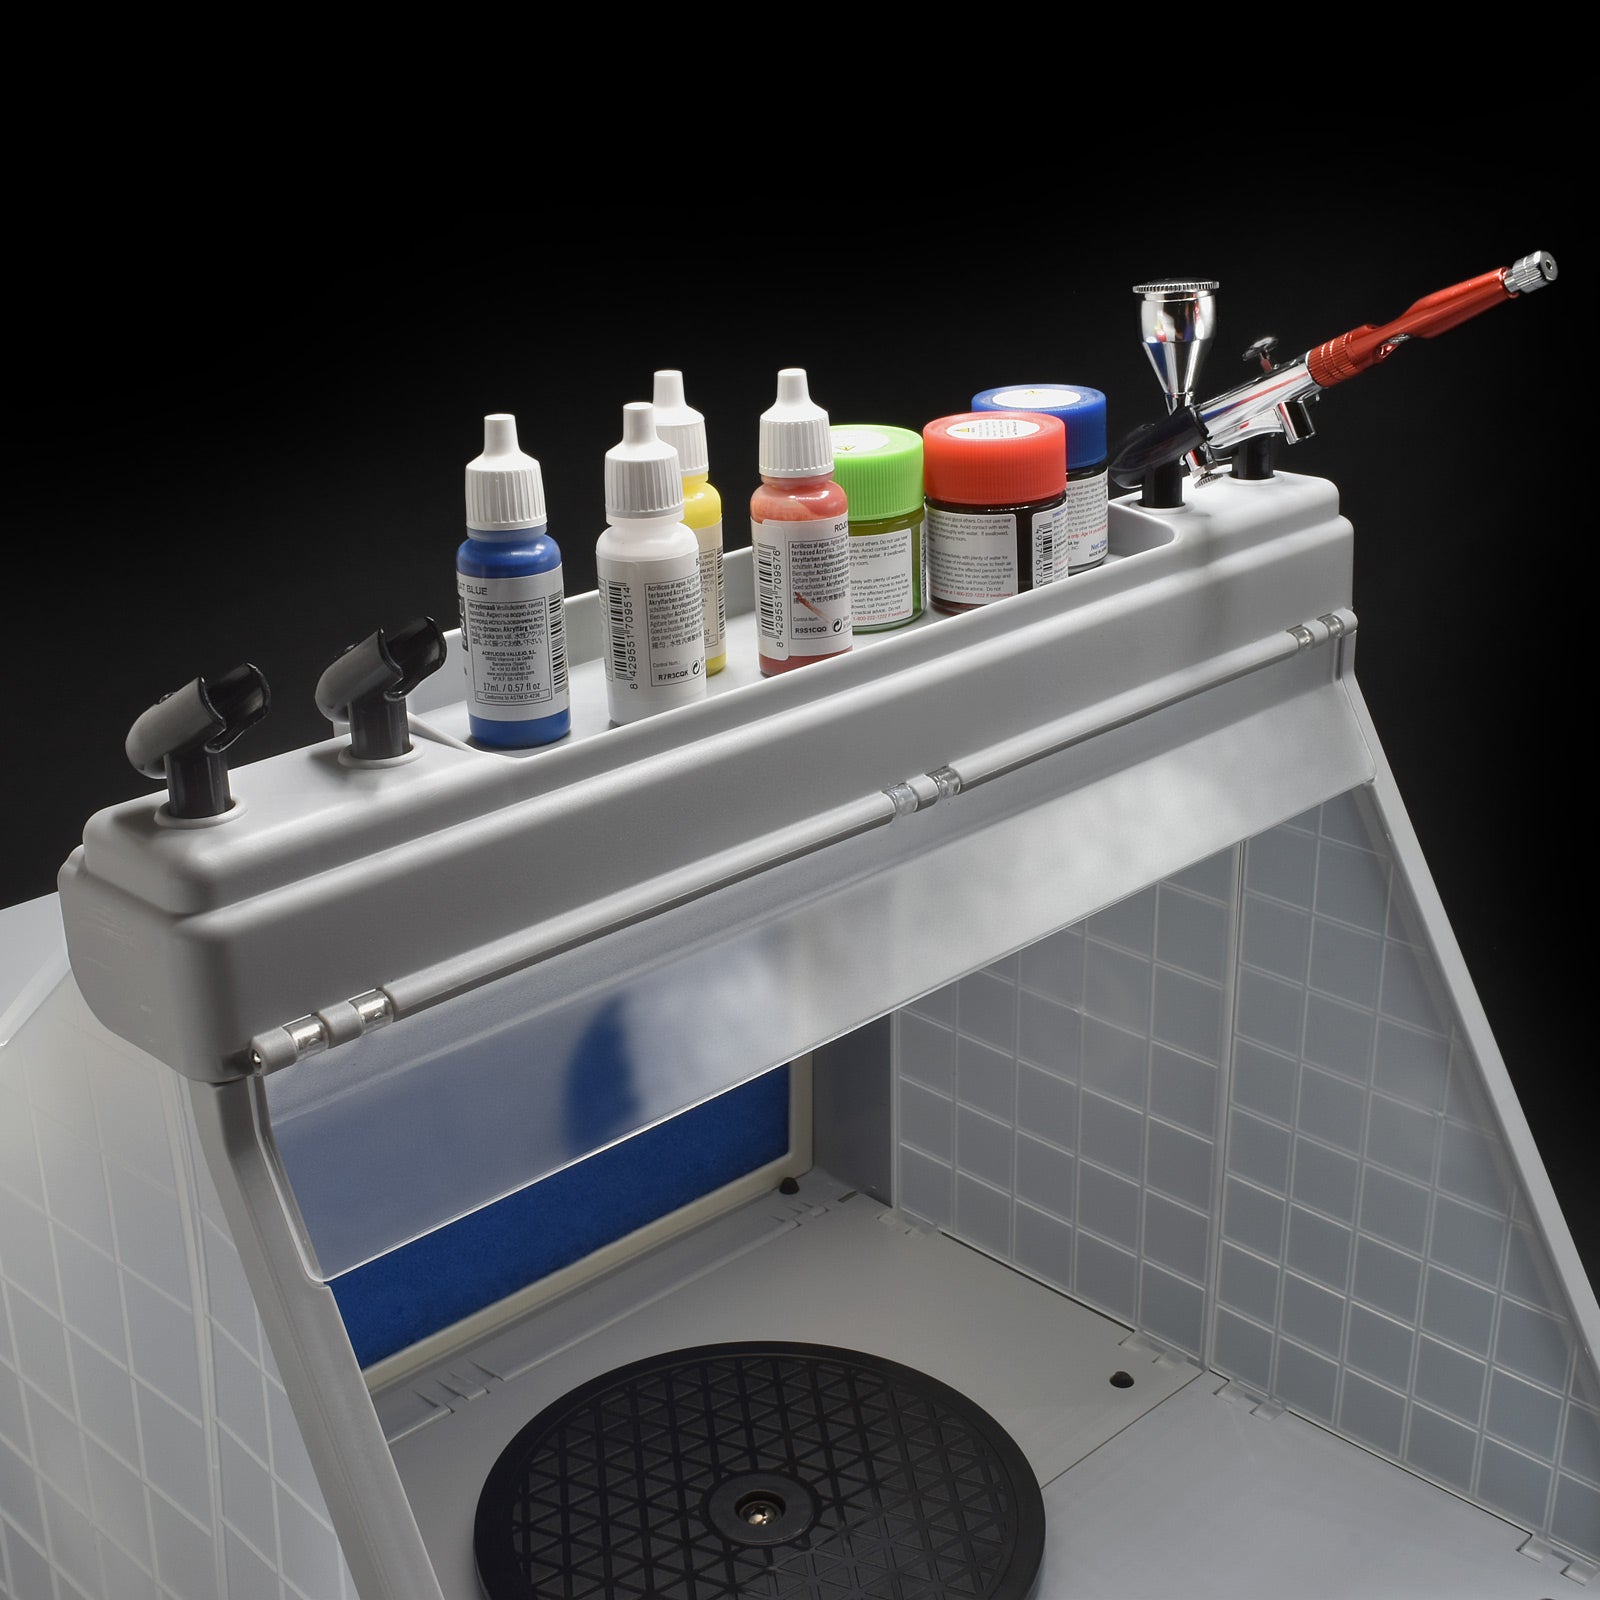 Airbrush Holder & Tray Attachment for Fold Up Spray Booth - Micro - Mark Airbrush Accessories